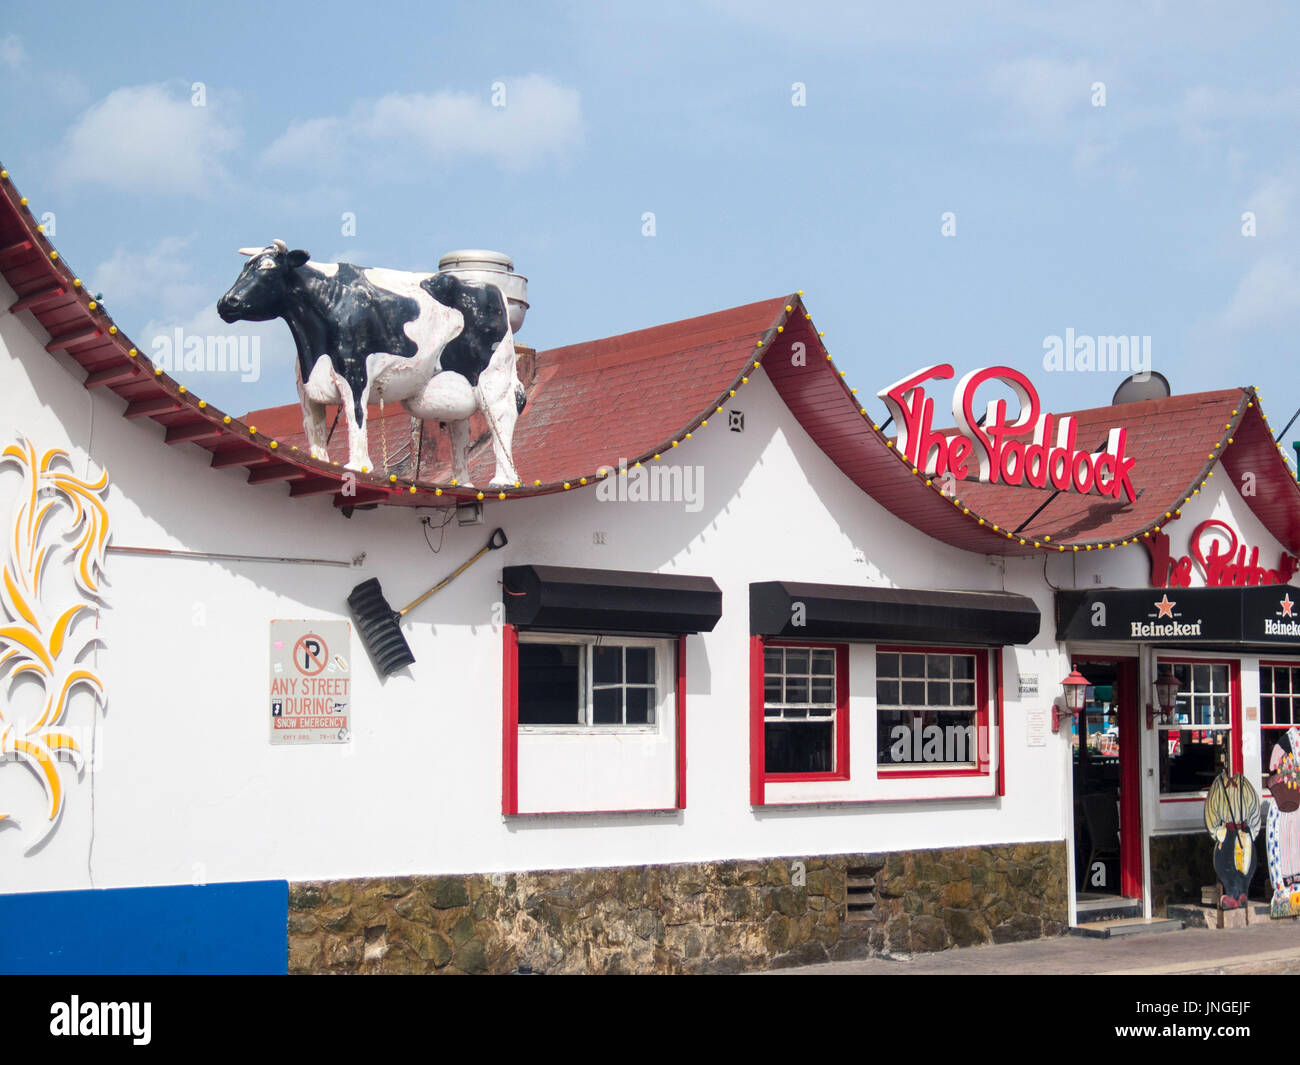 The Paddock Cow on the roof, West Indies Aruba Oranjestadt Bar Cafe Stock Photo